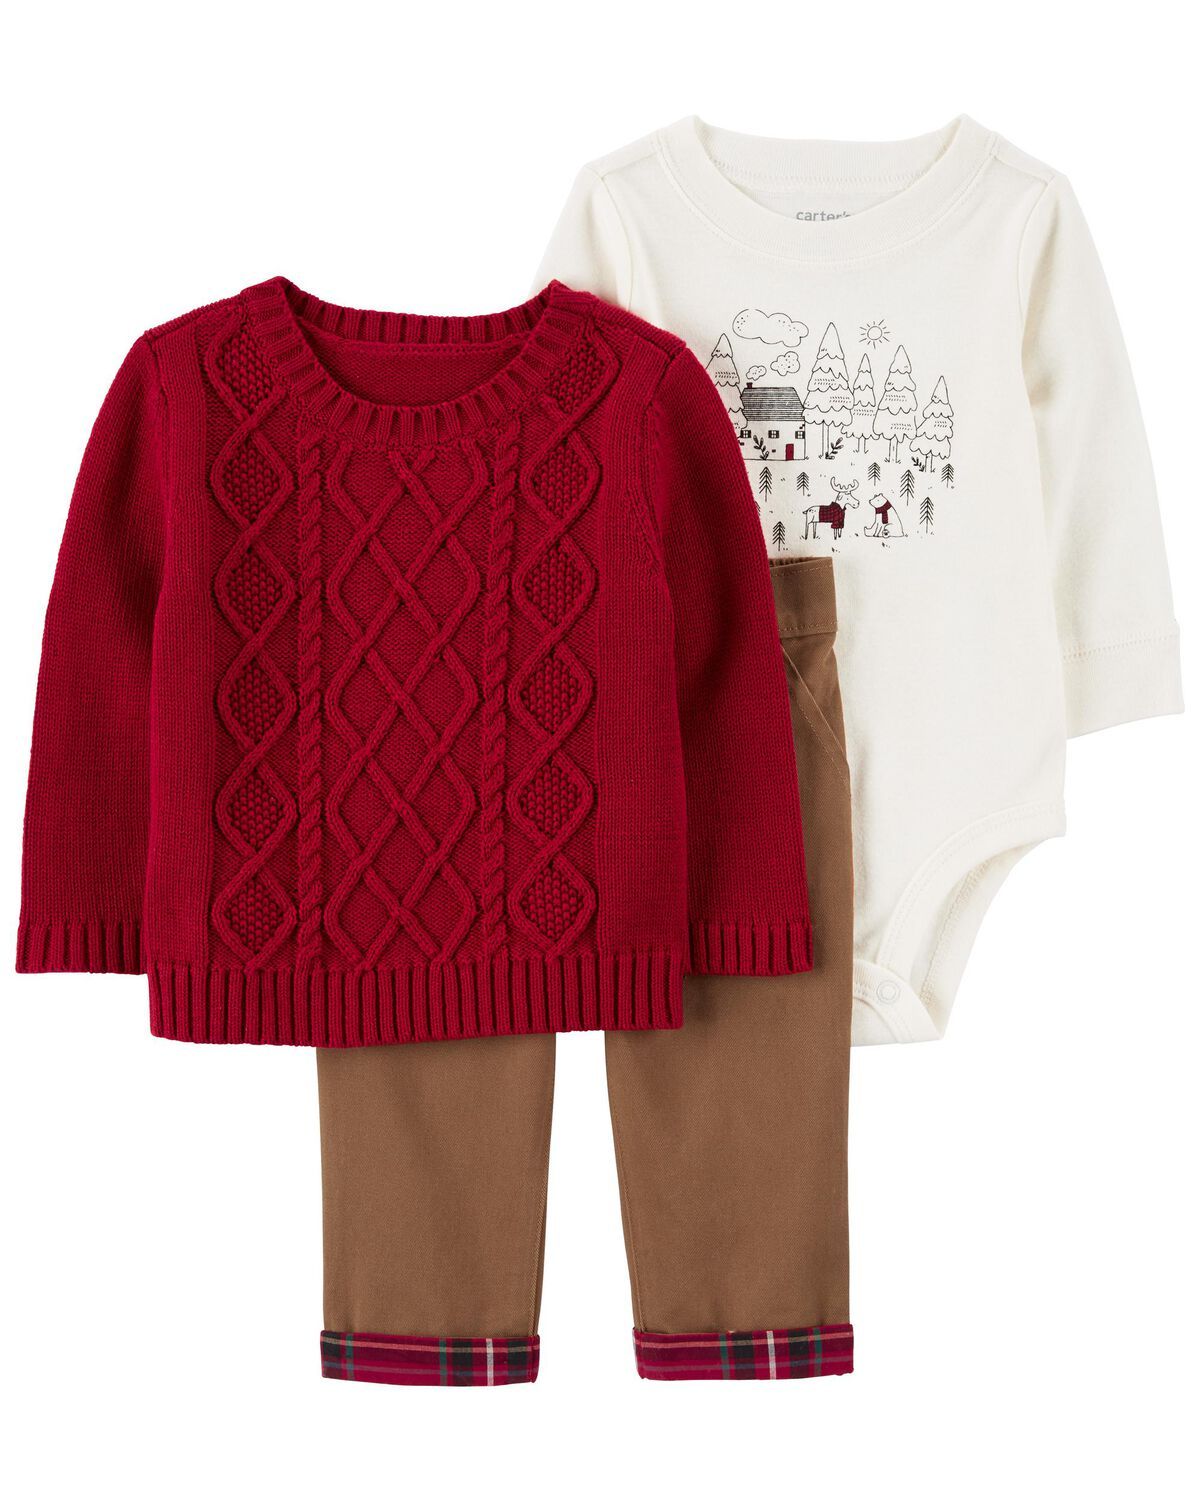 Red/Ivory Baby 3-Piece Sweater & Pant Outfit Set | carters.com | Carter's